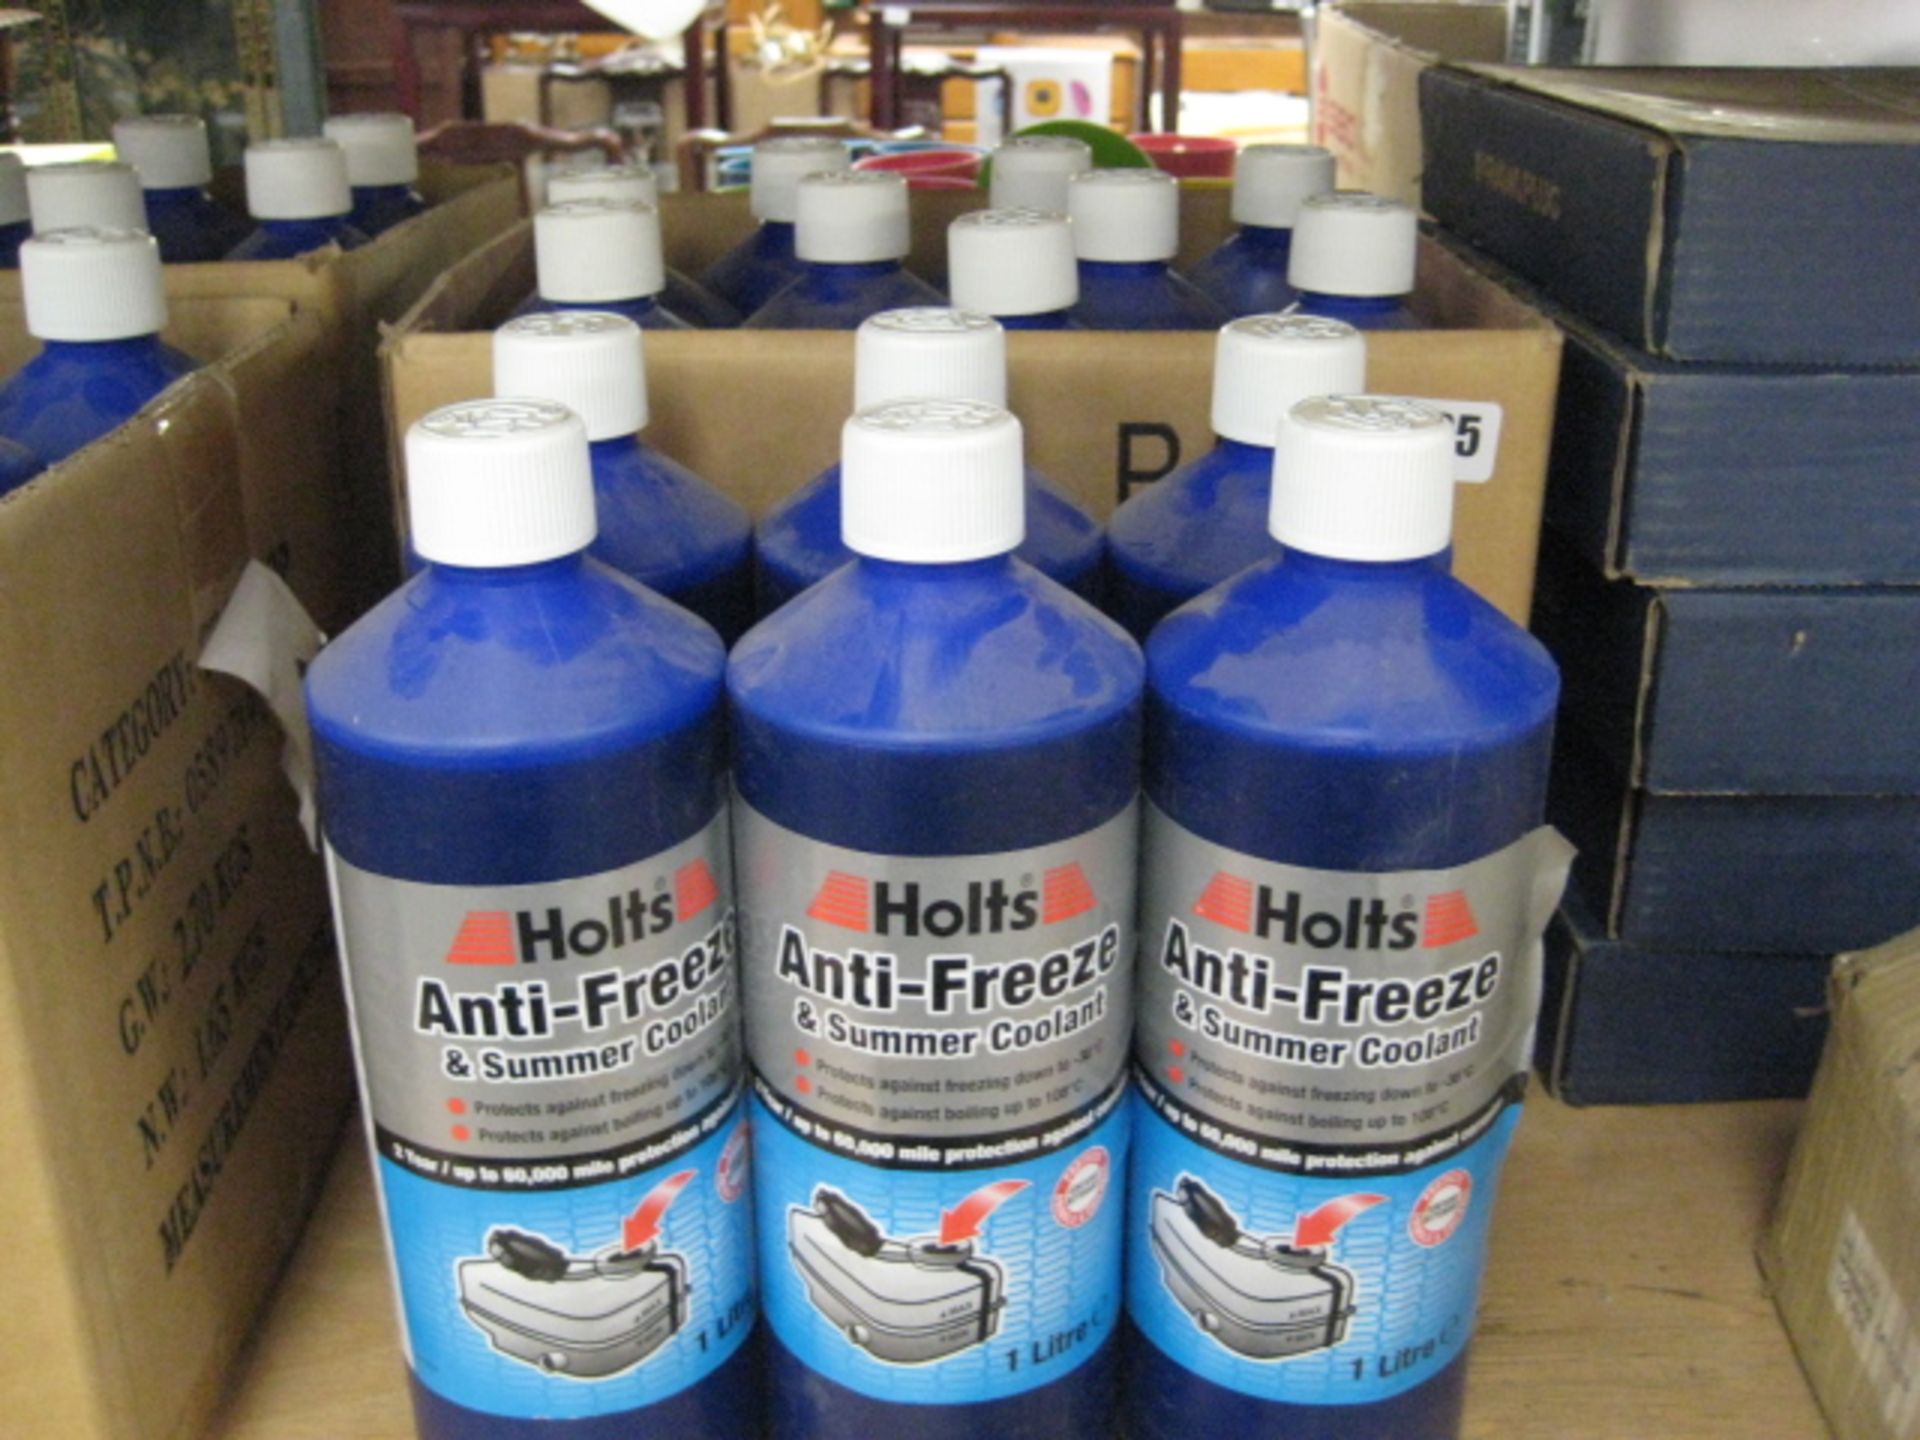 Approx. 15 1L tubs of Halts anti freeze and summer coolant